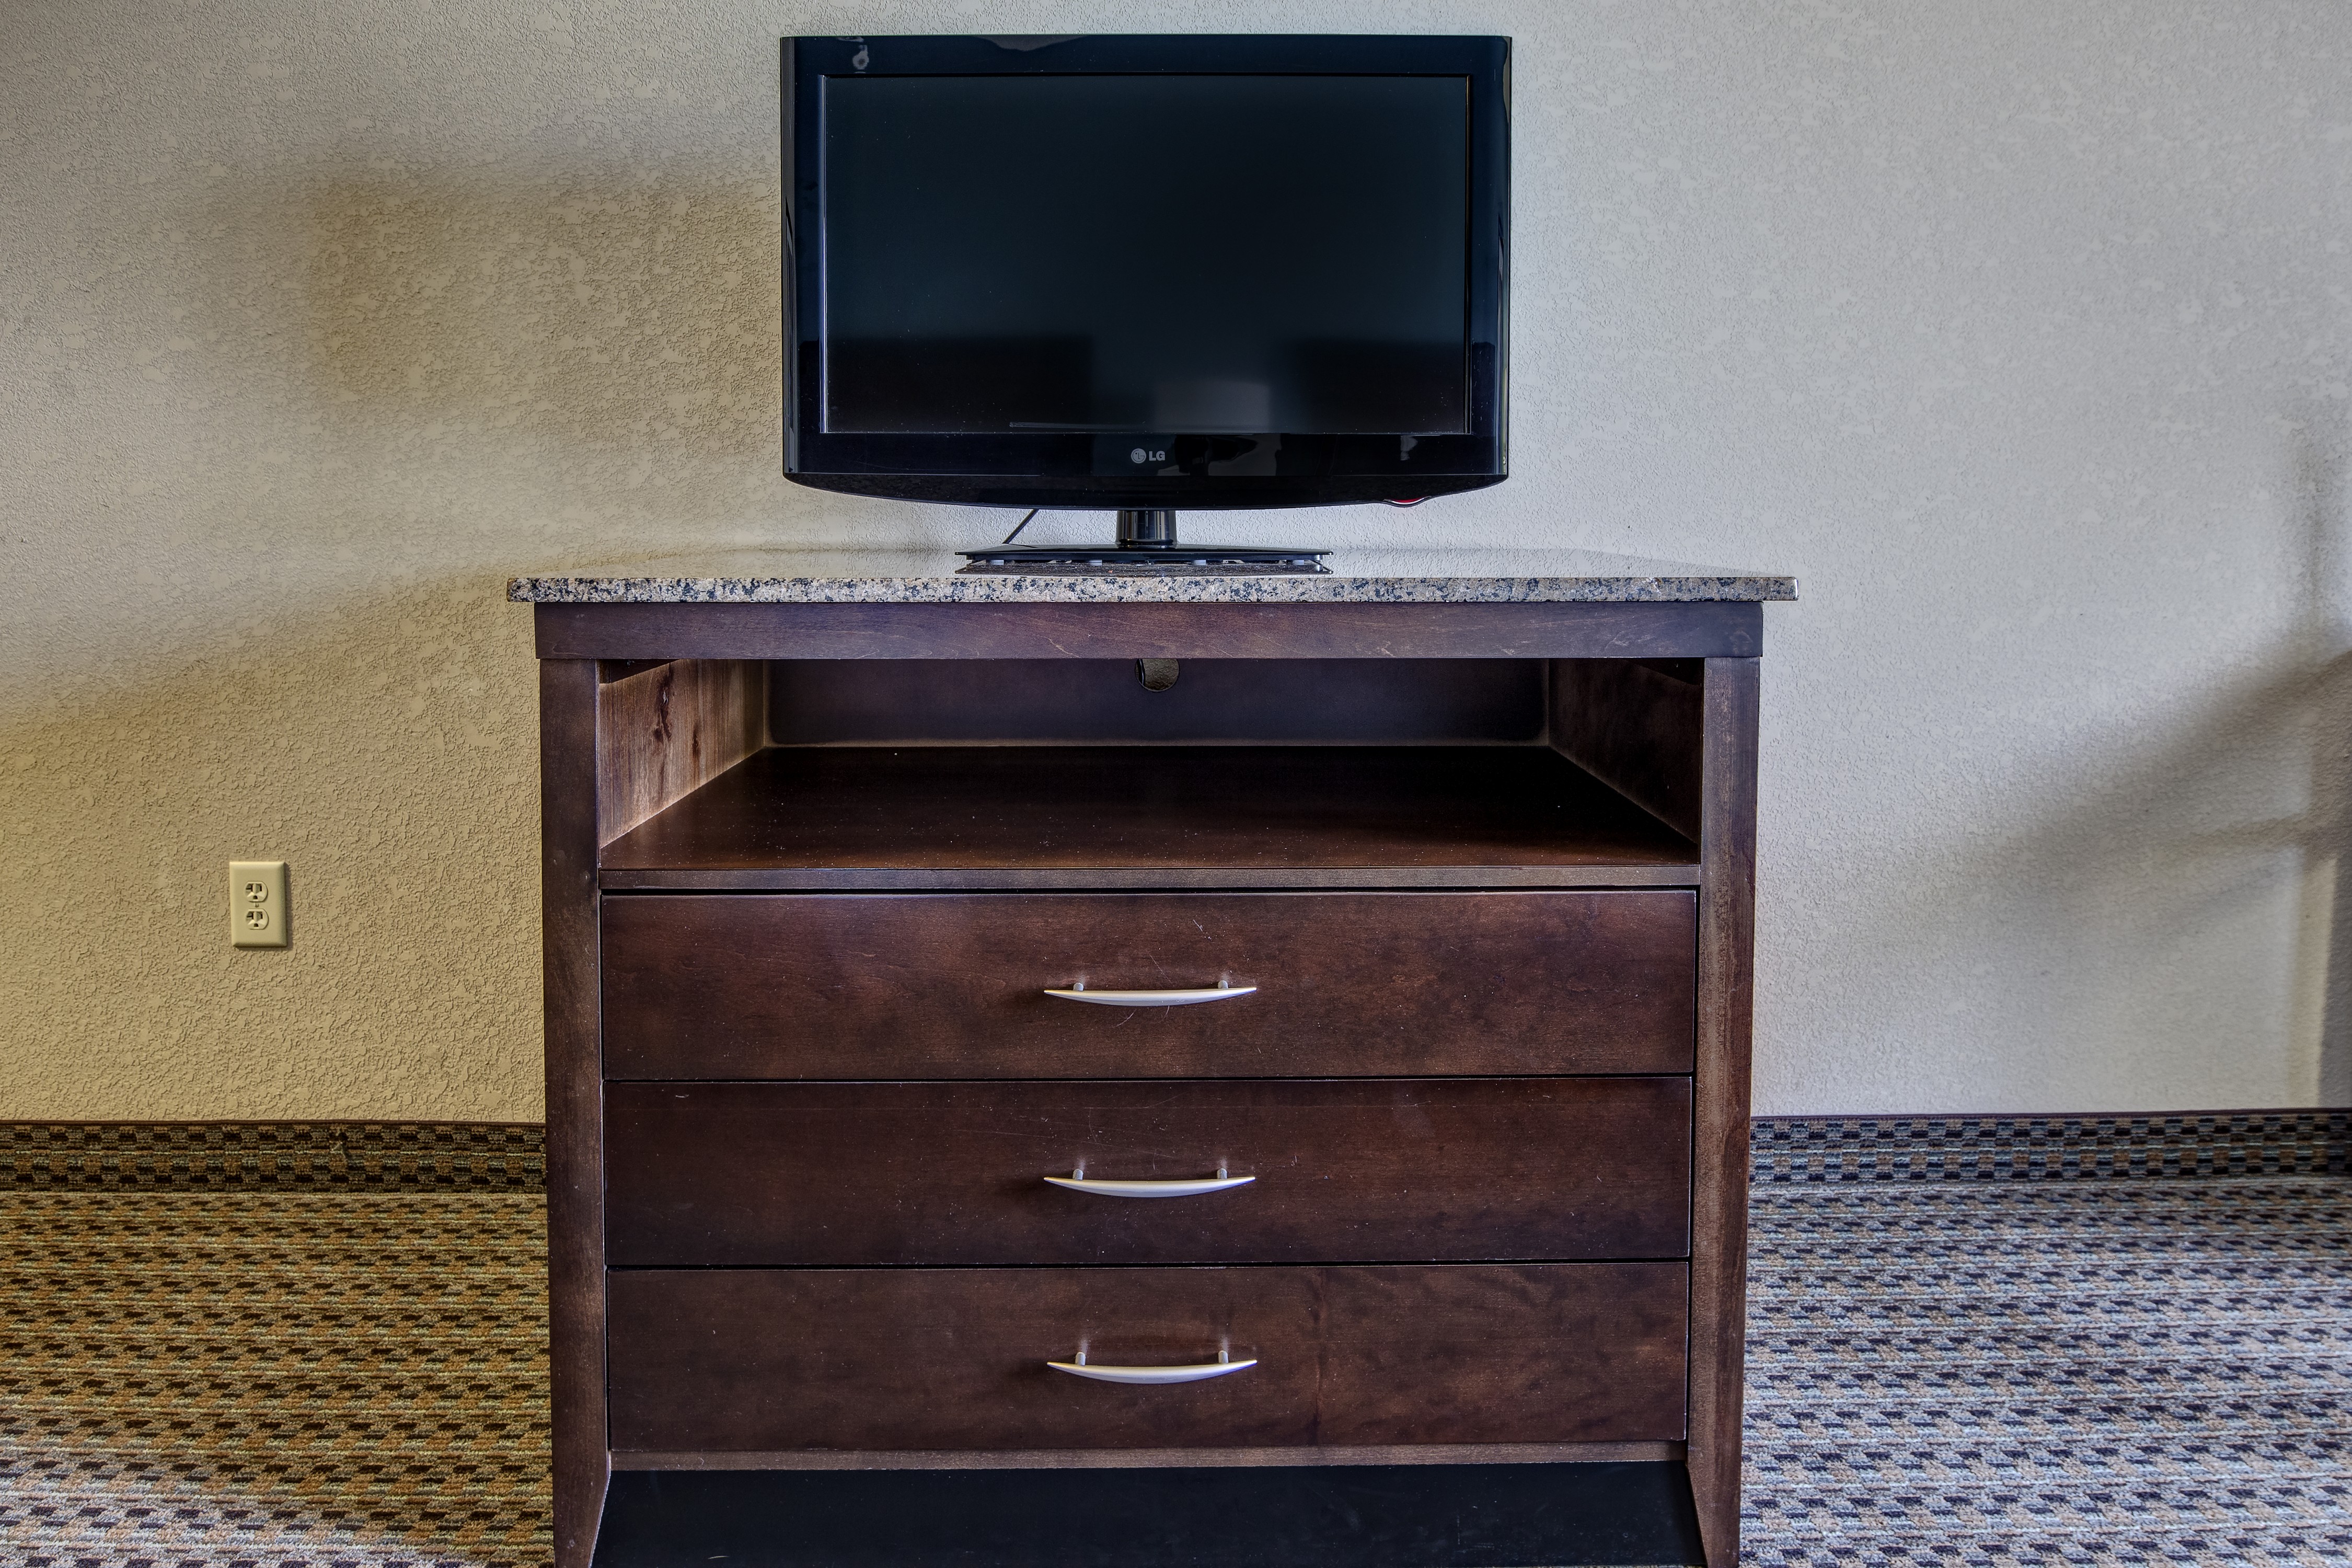 Guest Room Cabinet and HDTV